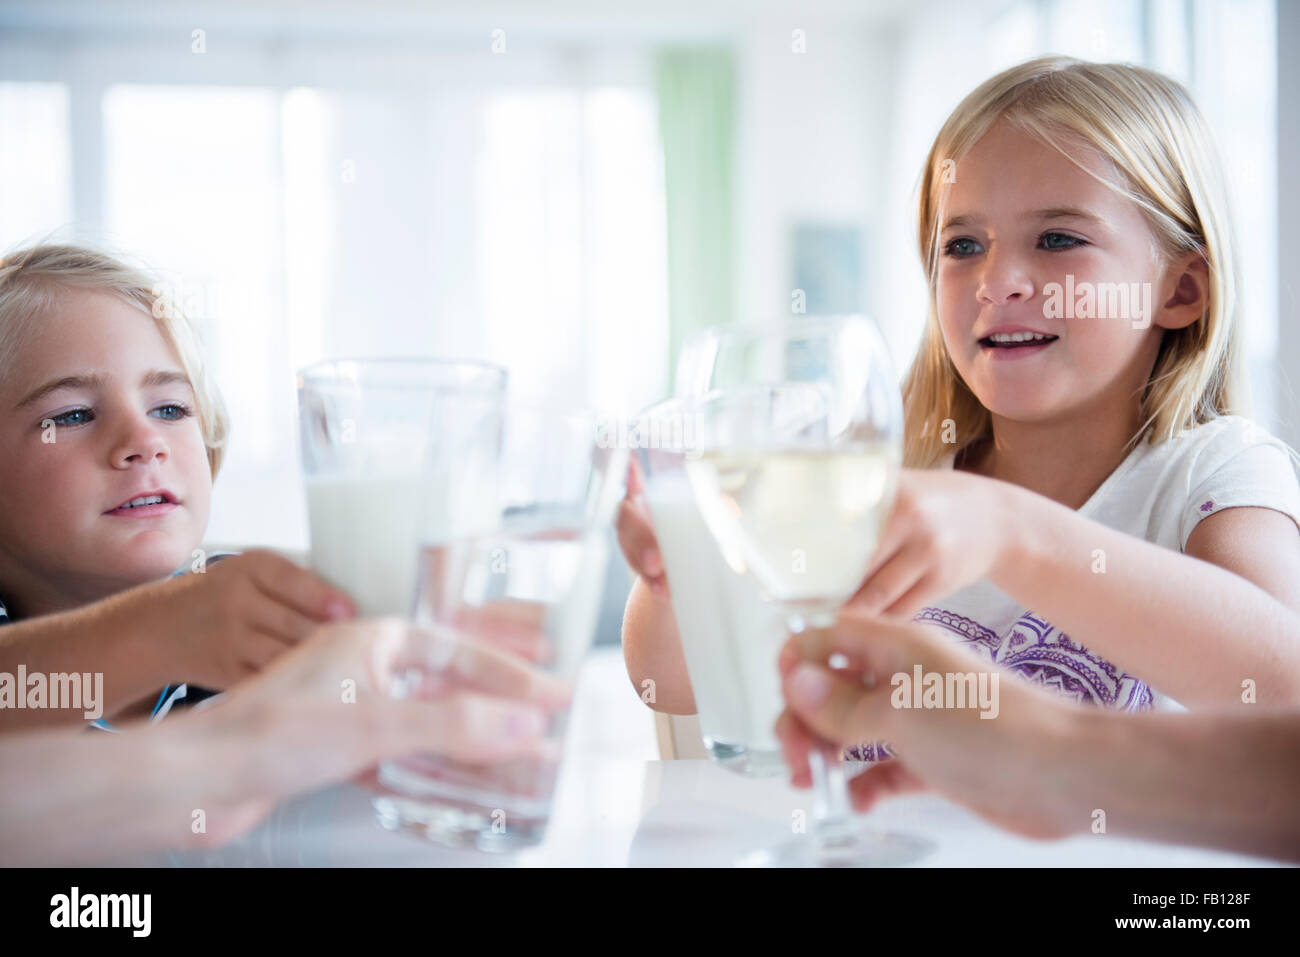 Family with son (4-5) and daughter (6-7) drinking refreshments Stock Photo